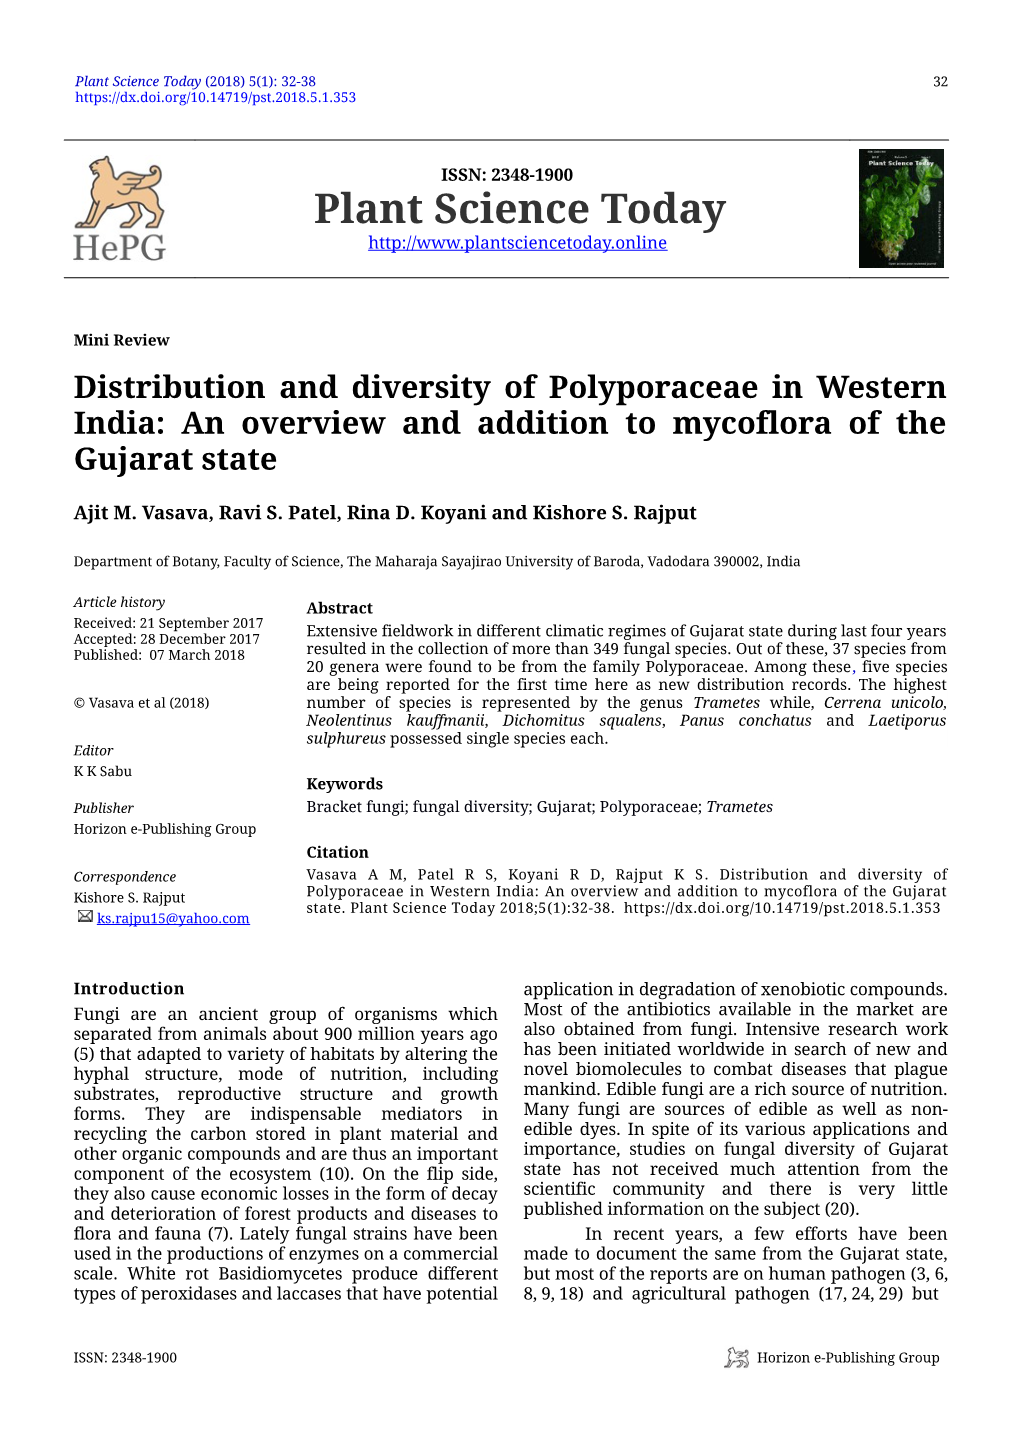 Distribution and Diversity of Polyporaceae in Western India: an Overview and Addition to Mycoflora of the Gujarat State